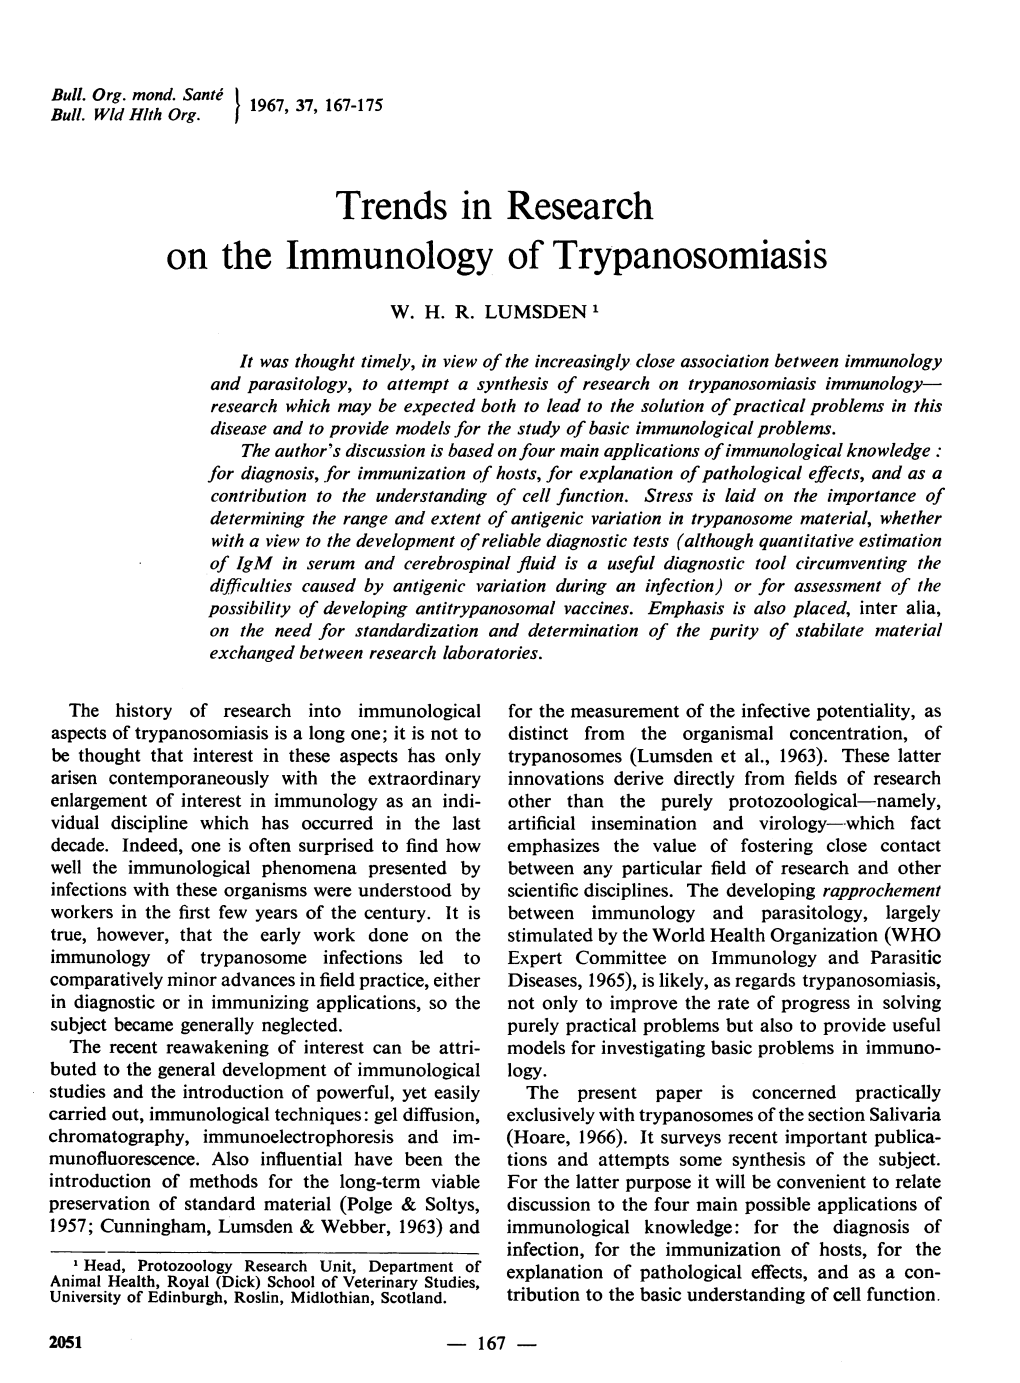 On the Immunology of Trypanosomiasis